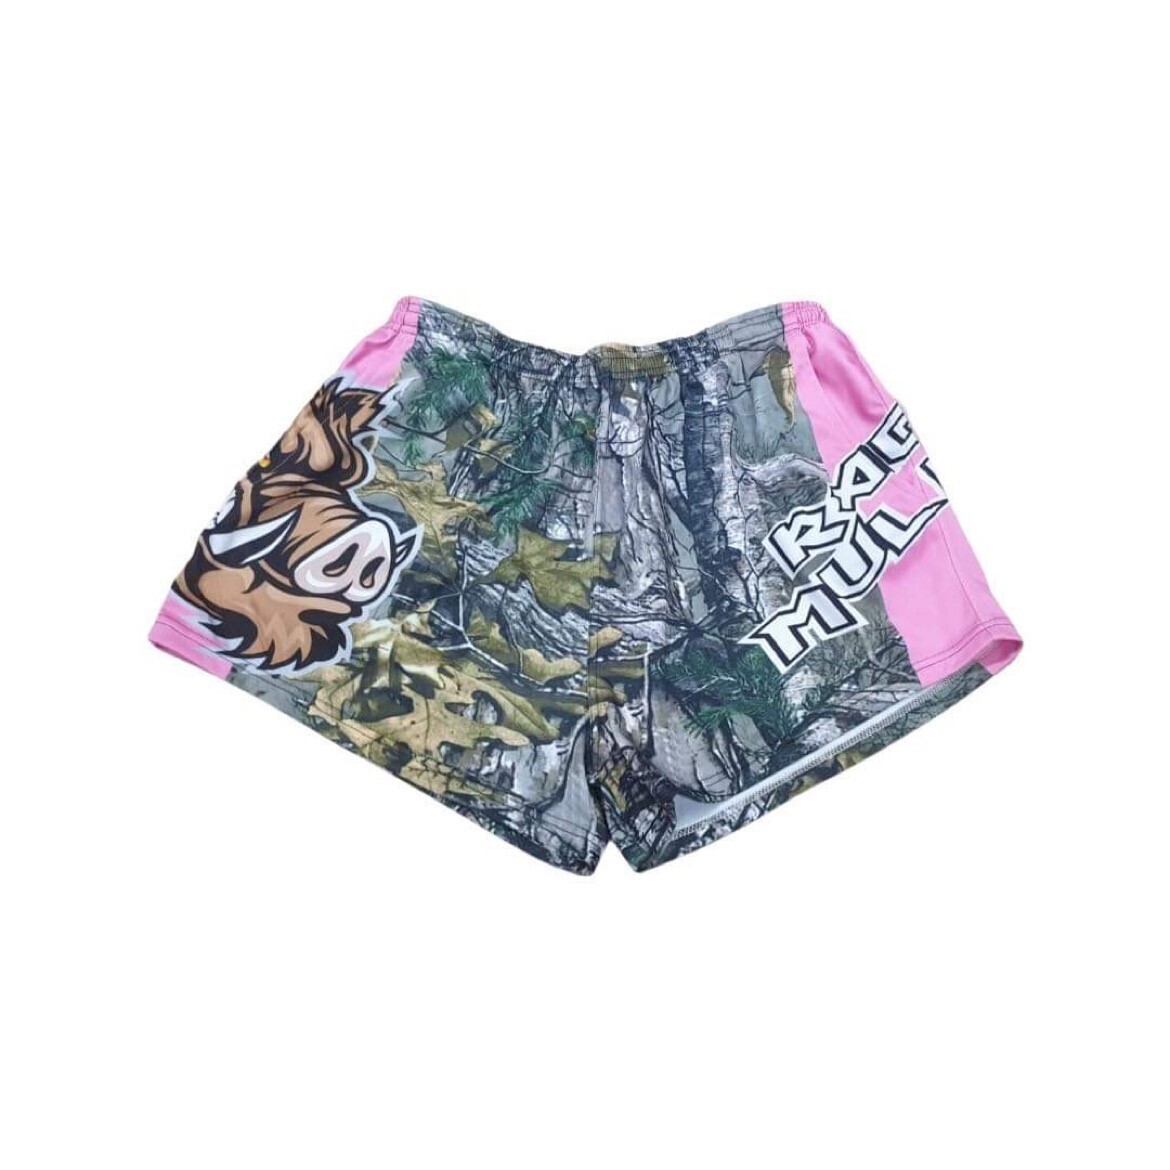 RUGBY SHORTS CAMO/PINK BOAR, Size: 2XL